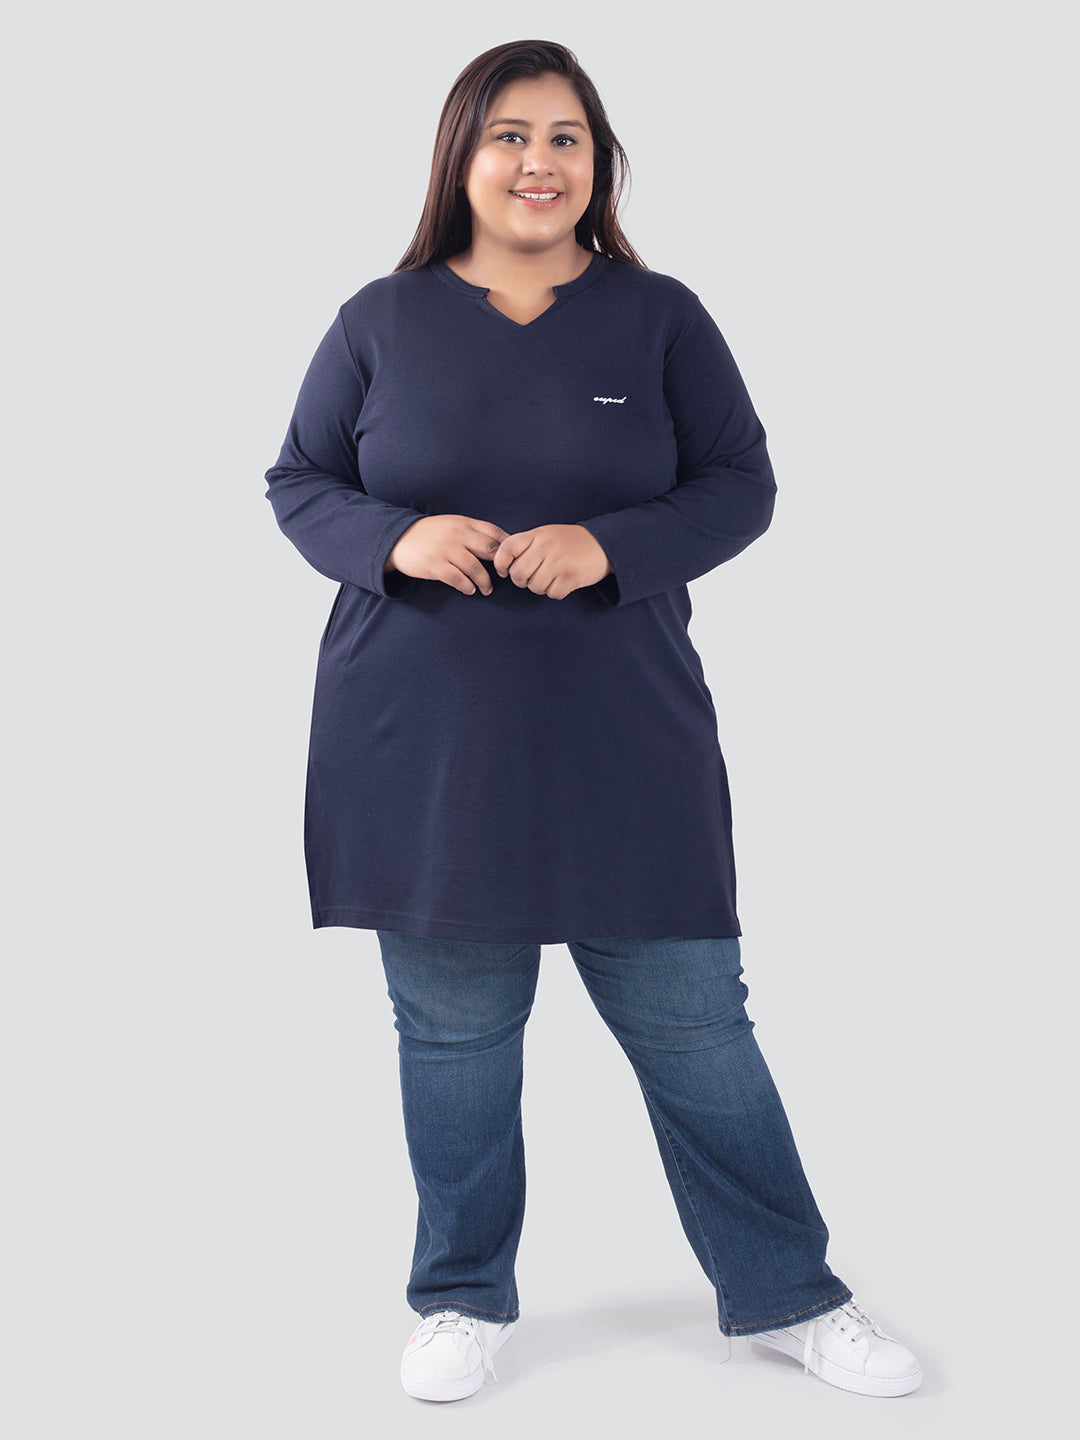 Stylish Navy Blue Plus Size Cotton Long Top For Women (Full Sleeve) Online In India